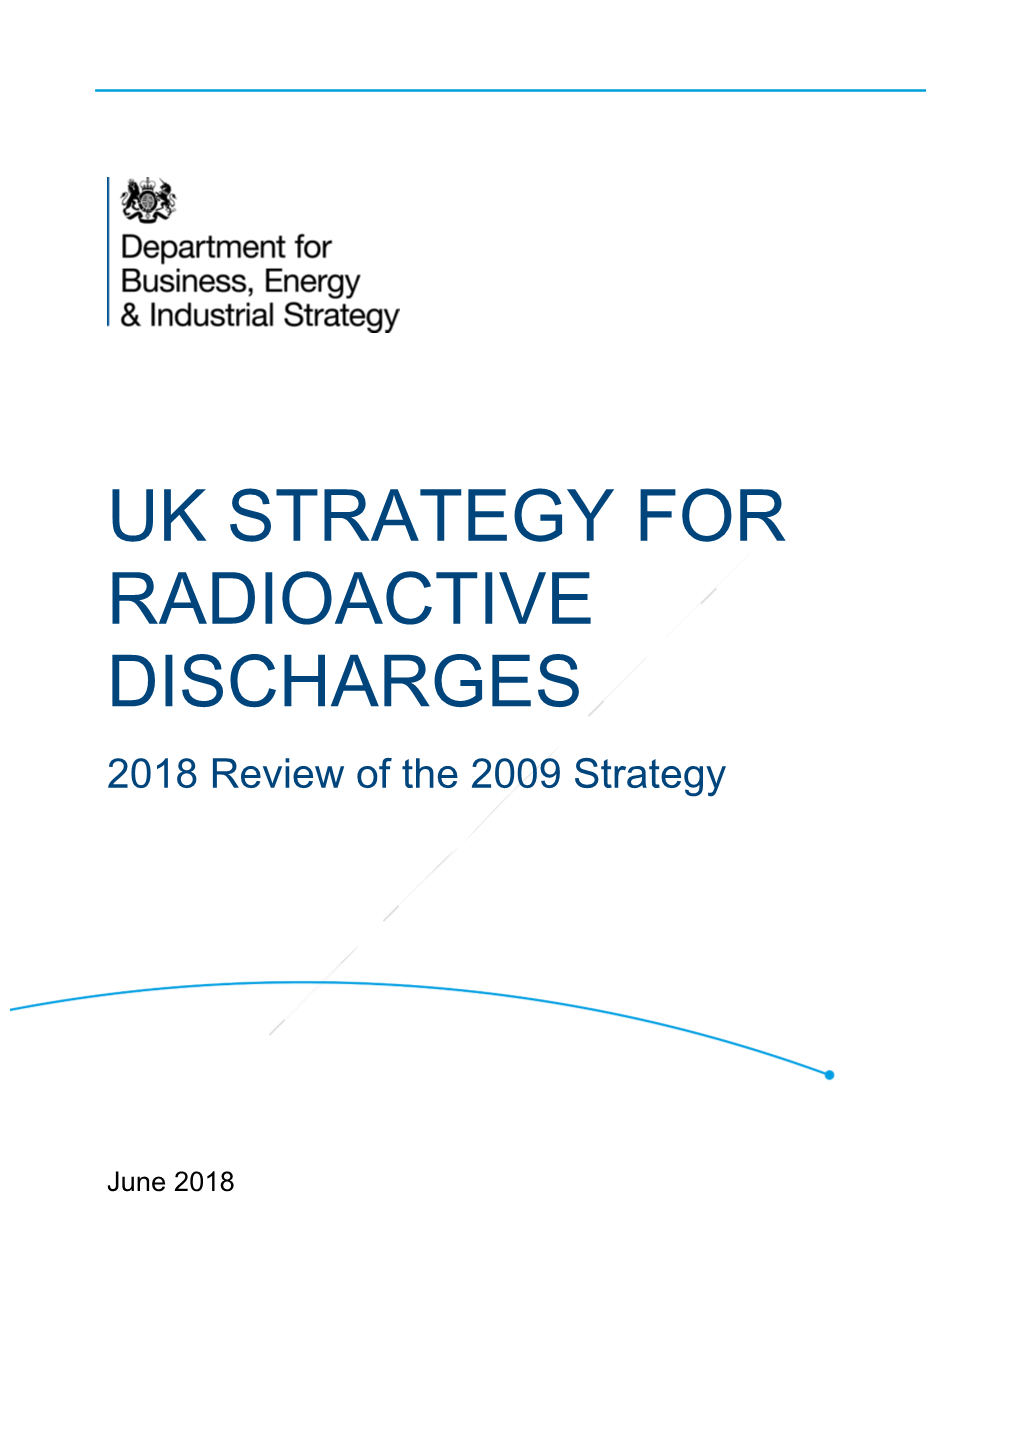 UK STRATEGY for RADIOACTIVE DISCHARGES 2018 Review of the 2009 Strategy